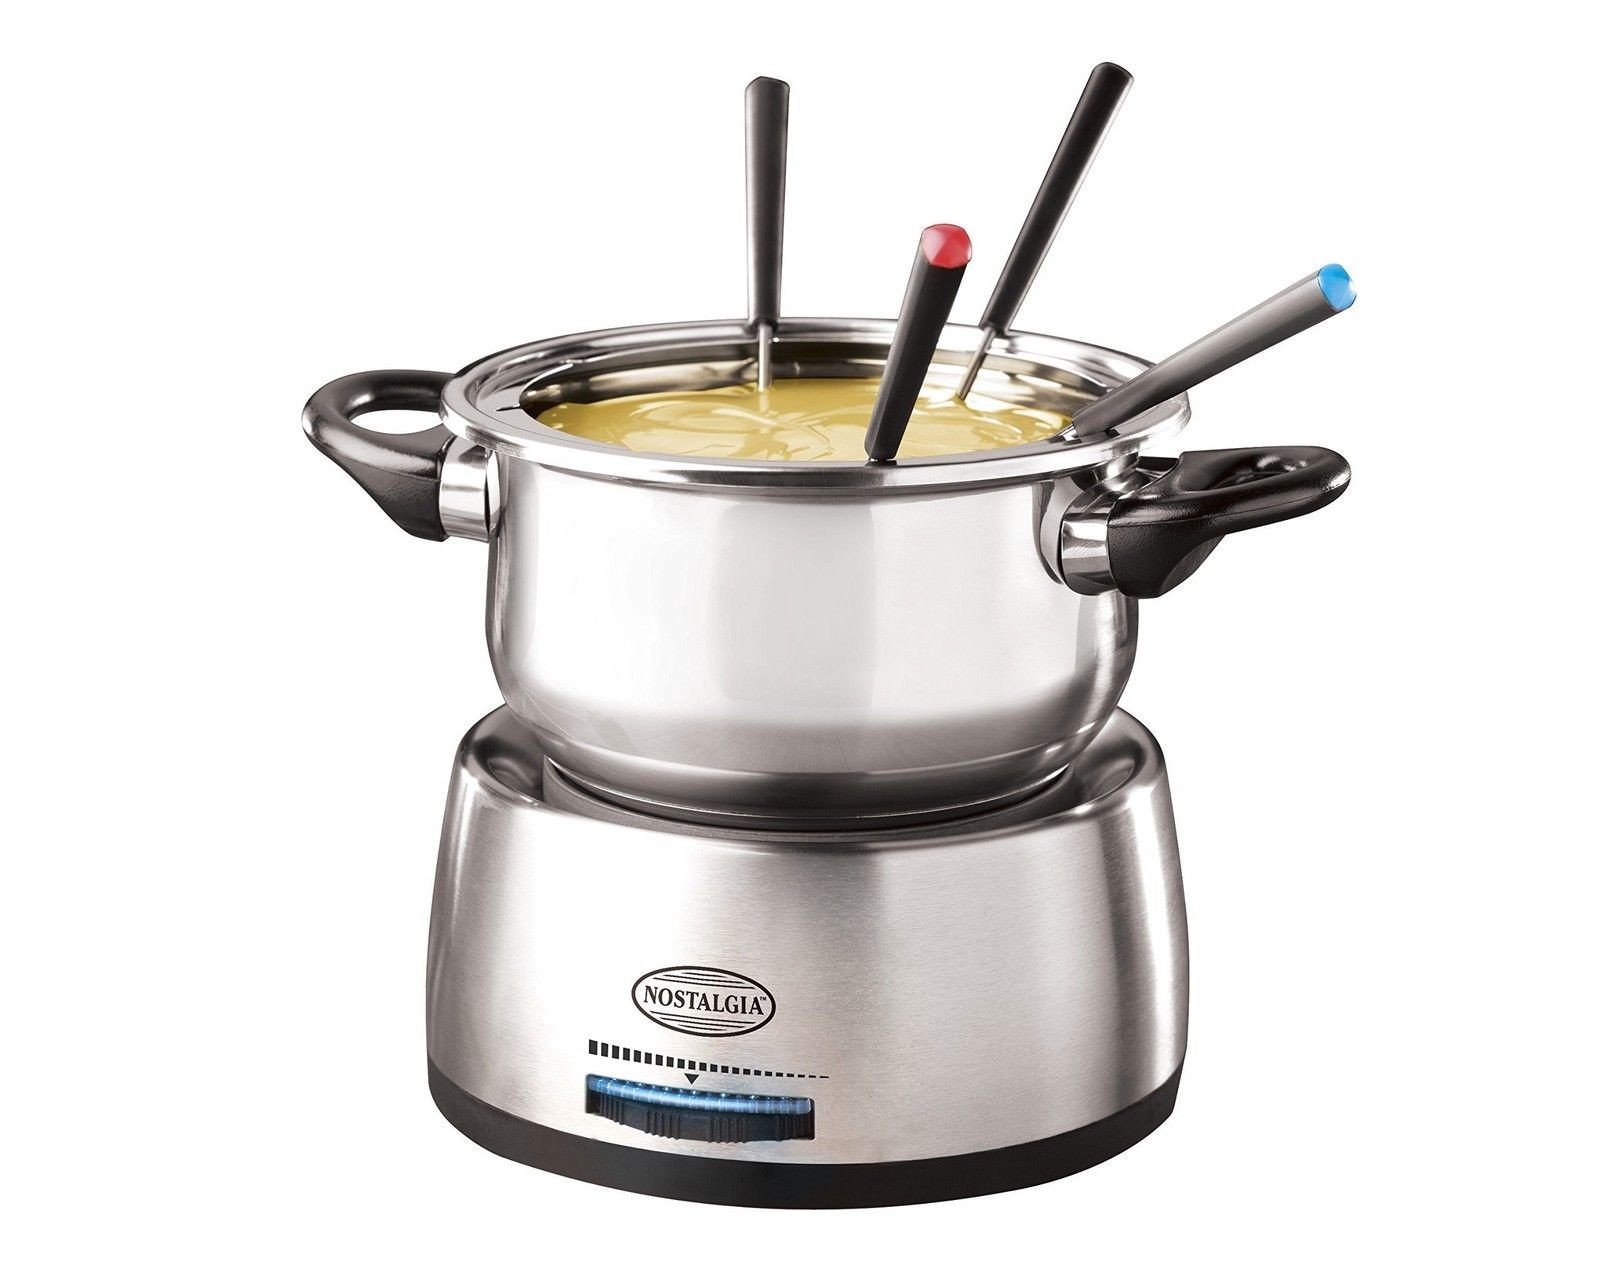 Nostalgia Fps200 6-Cup Stainless Steel Electric Fondue Pot 1 - Swiftsly Nostalgia Stainless Steel Electric Fondue Pot